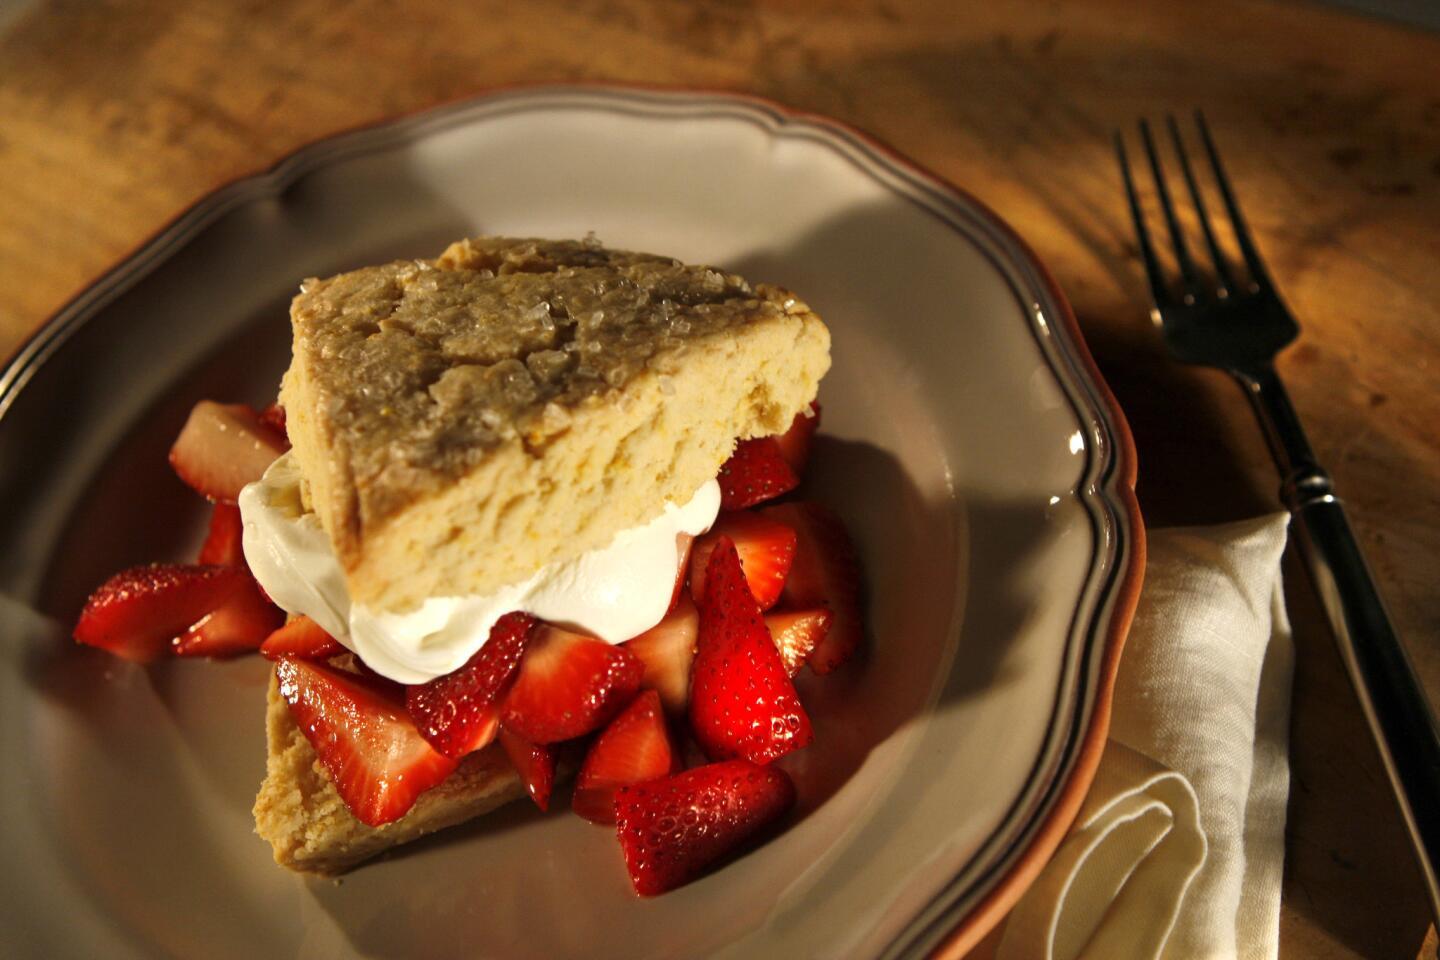 A classic: Orange-flavored shortcakes with strawberries and cream.